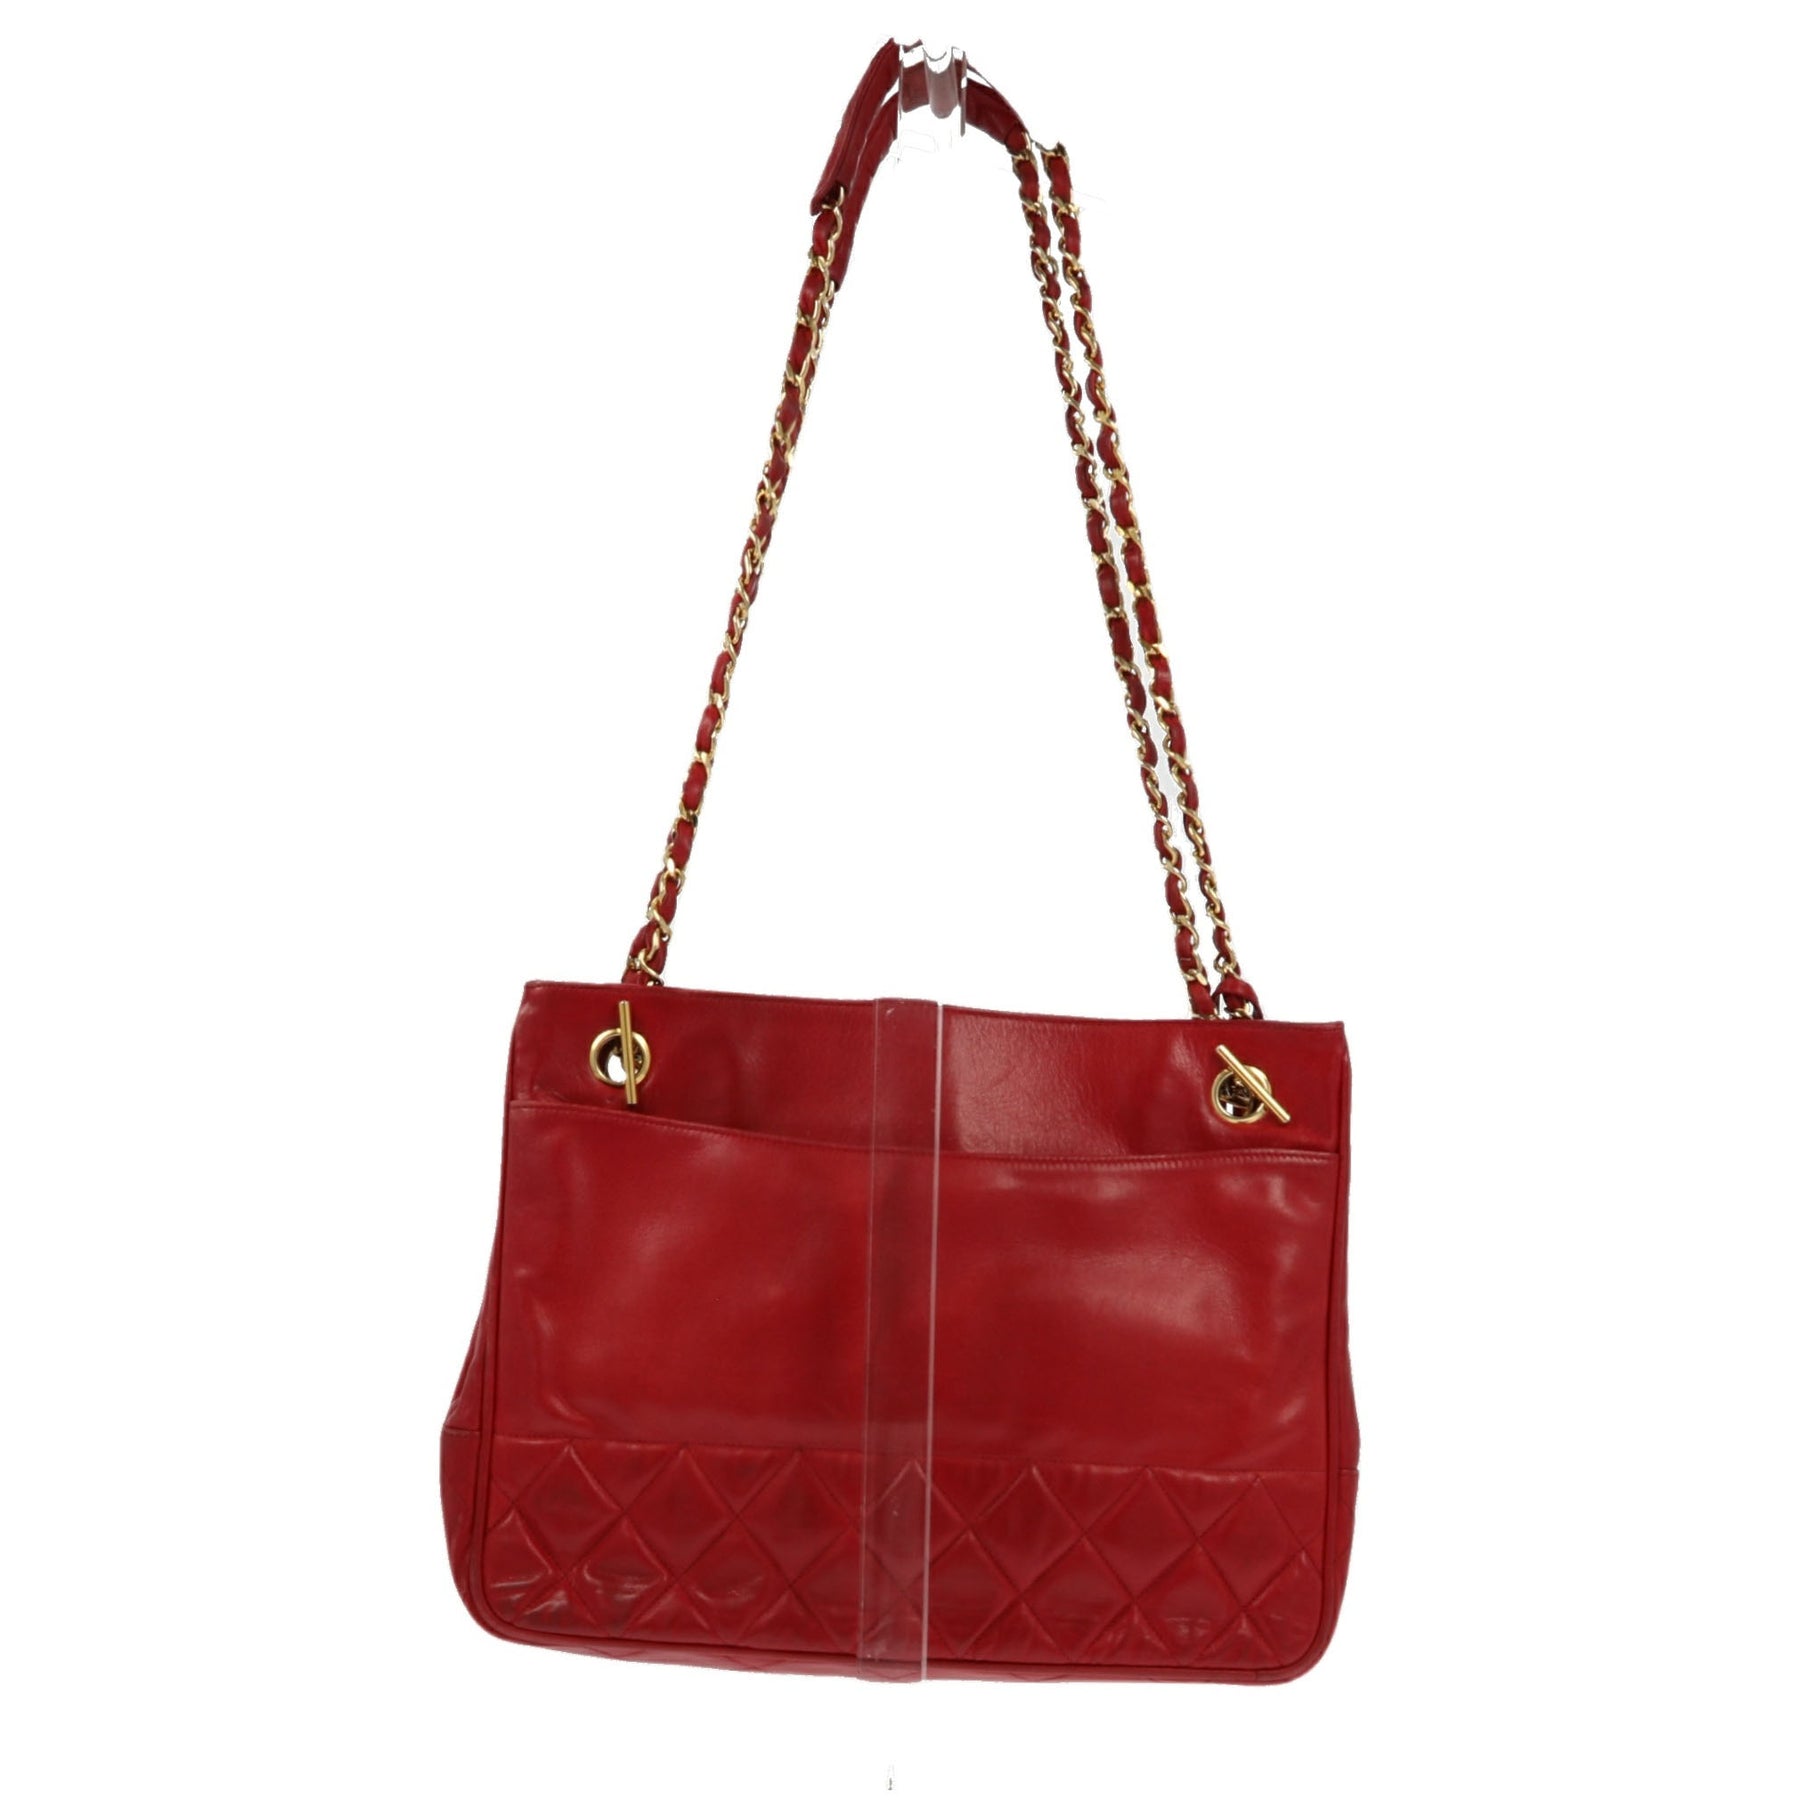 Vintage CHANEL Red Calfskin Classic Shoulder Tote Bag With 